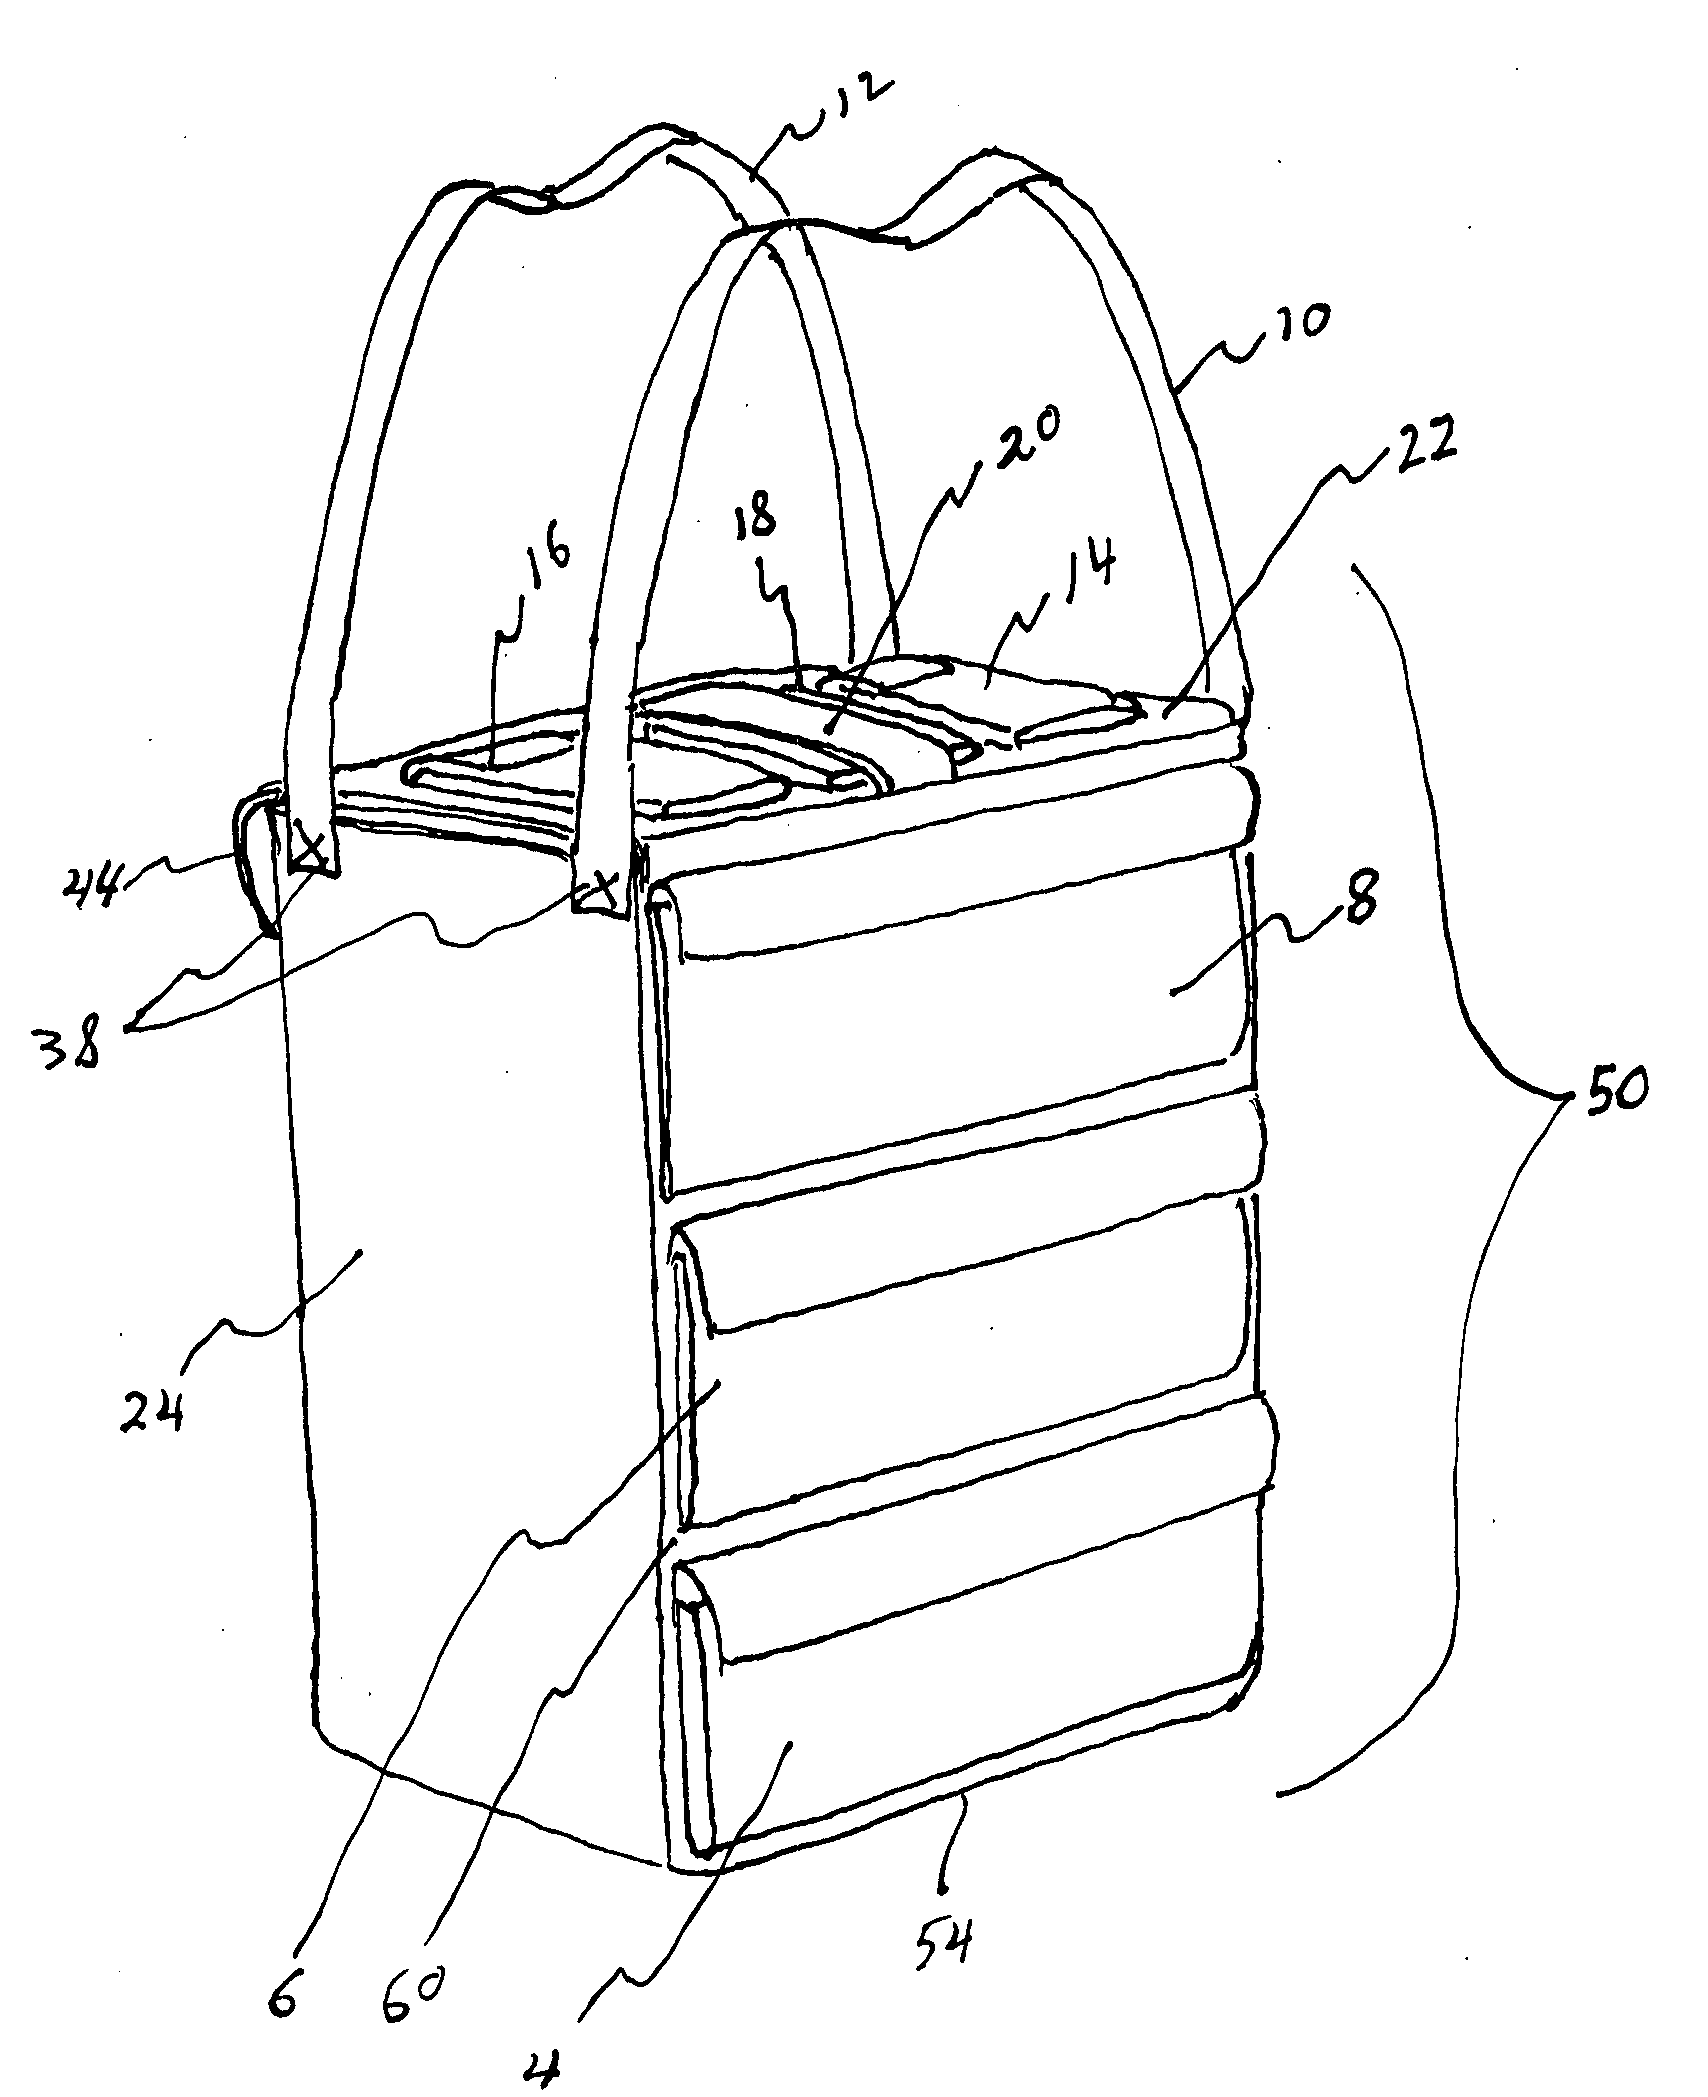 Grocery bag with pockets